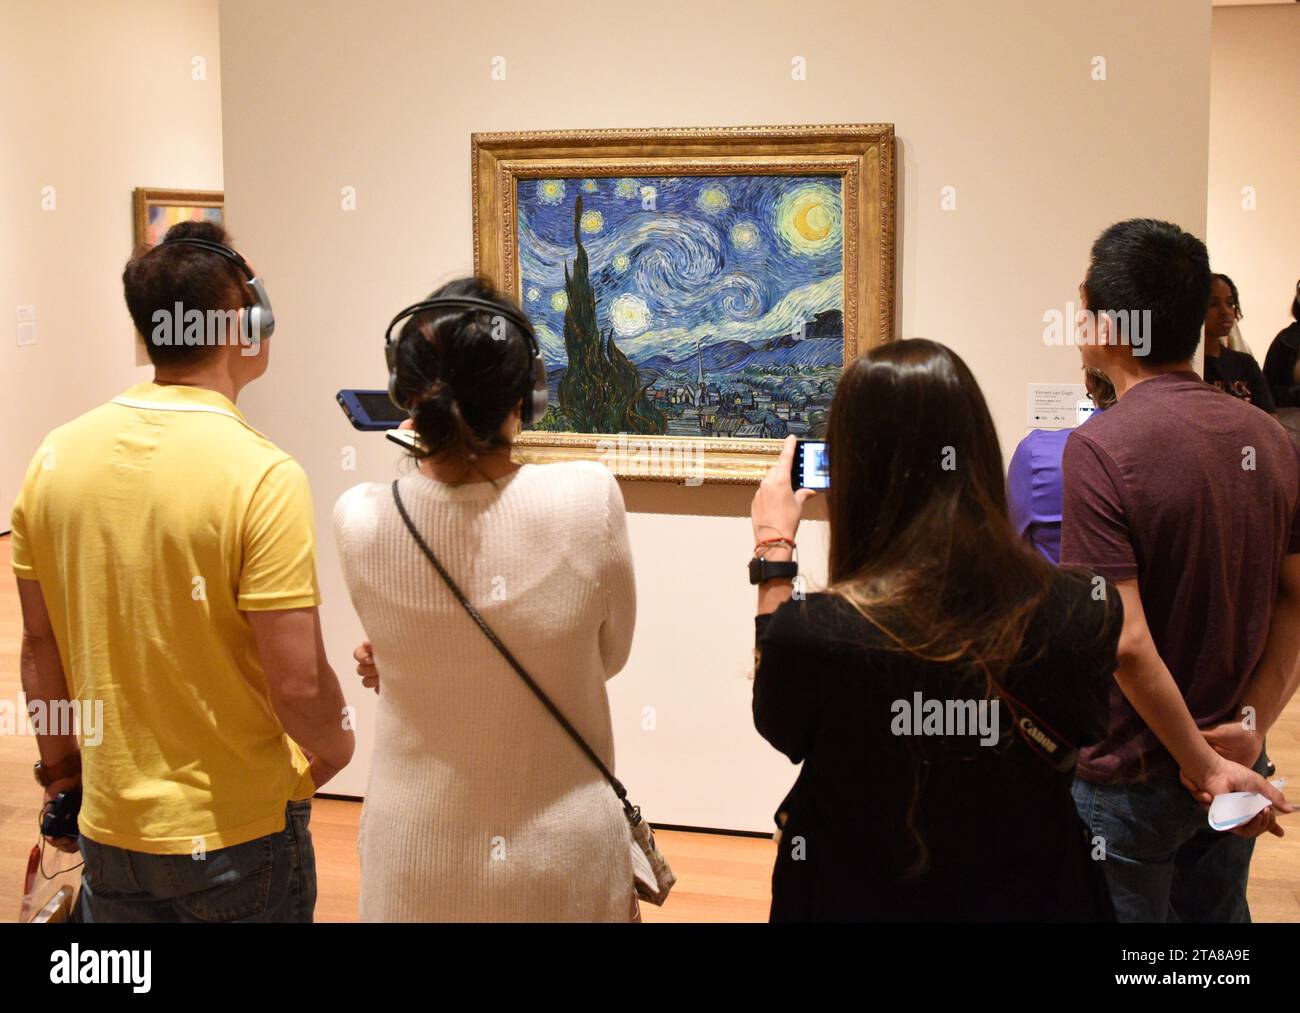 New York, USA - June 8, 2018: People near the Starry Night by Vincent van Gogh painting in Museum of Modern Art in New York City. Stock Photo